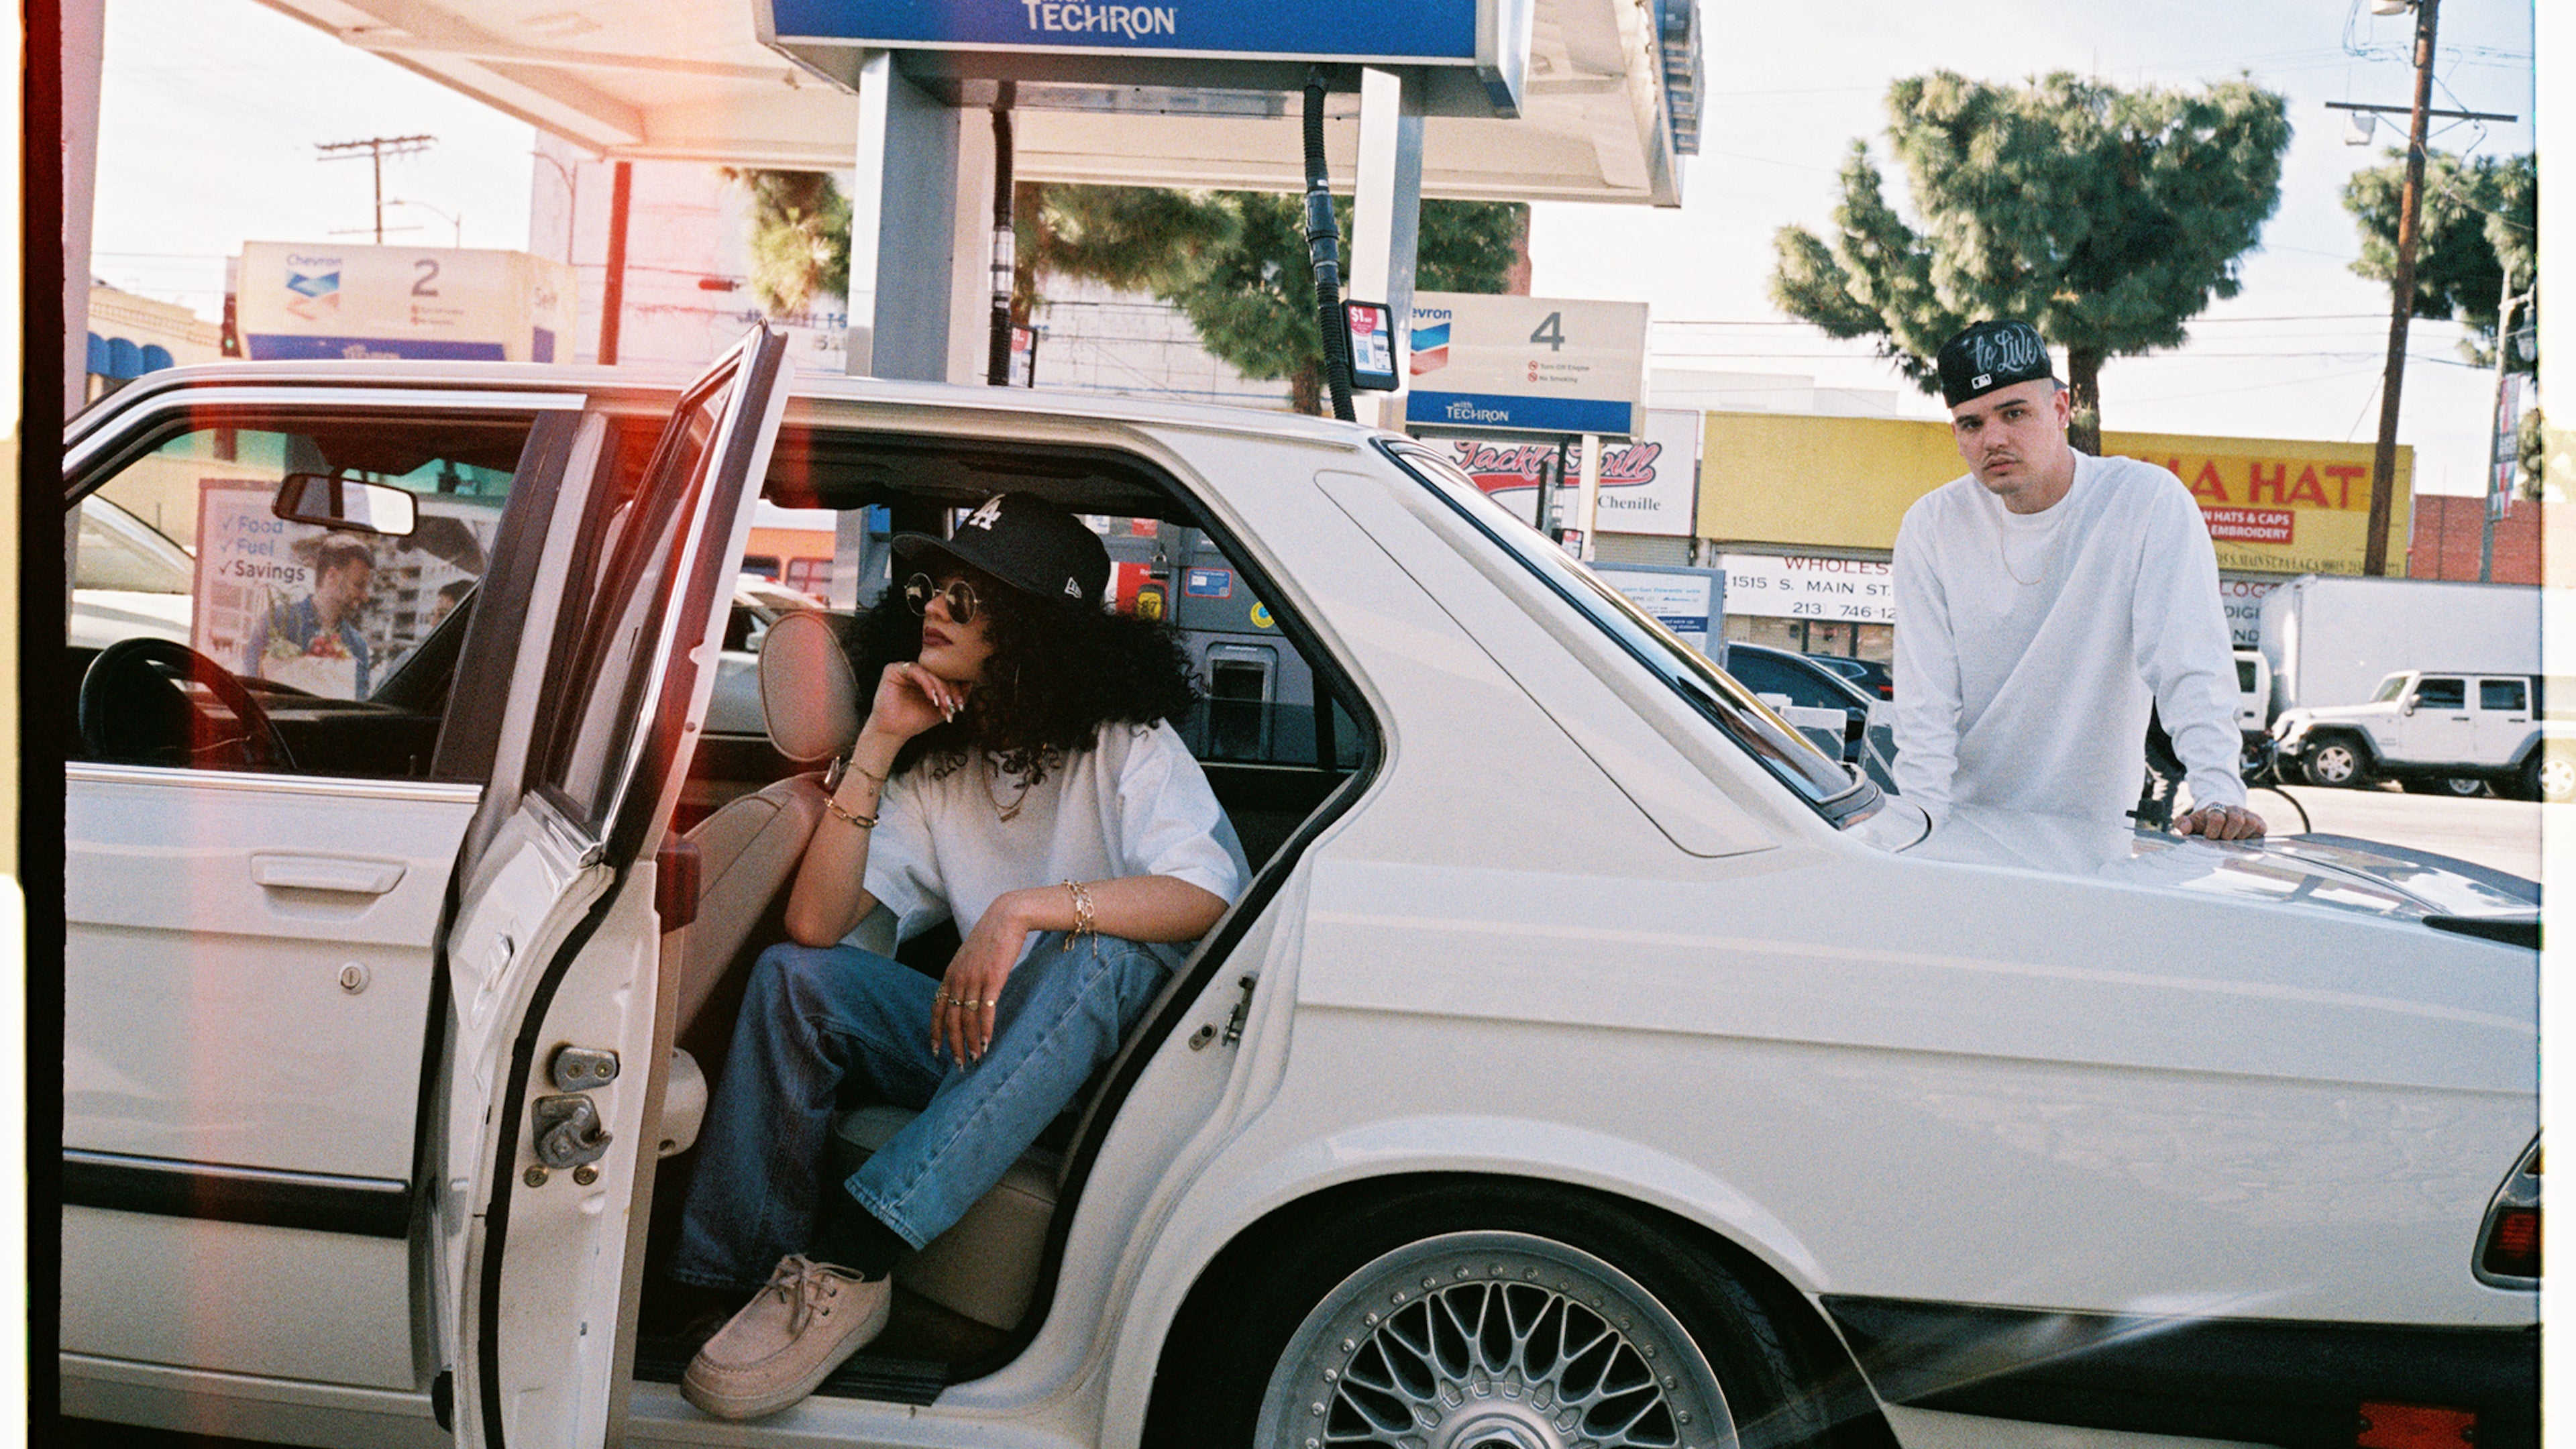 WHITE T SHIRT, FASHION, BLANKS , WHITE BMW AT A GAS STATION A MAN WEARING A WHITE T SHIRT IS PUMPING GAS WHILE AN ATTRACTIVE LADY IS ALSO WEARING A WHITE T SHIRT SITS IN THE CAR POSING